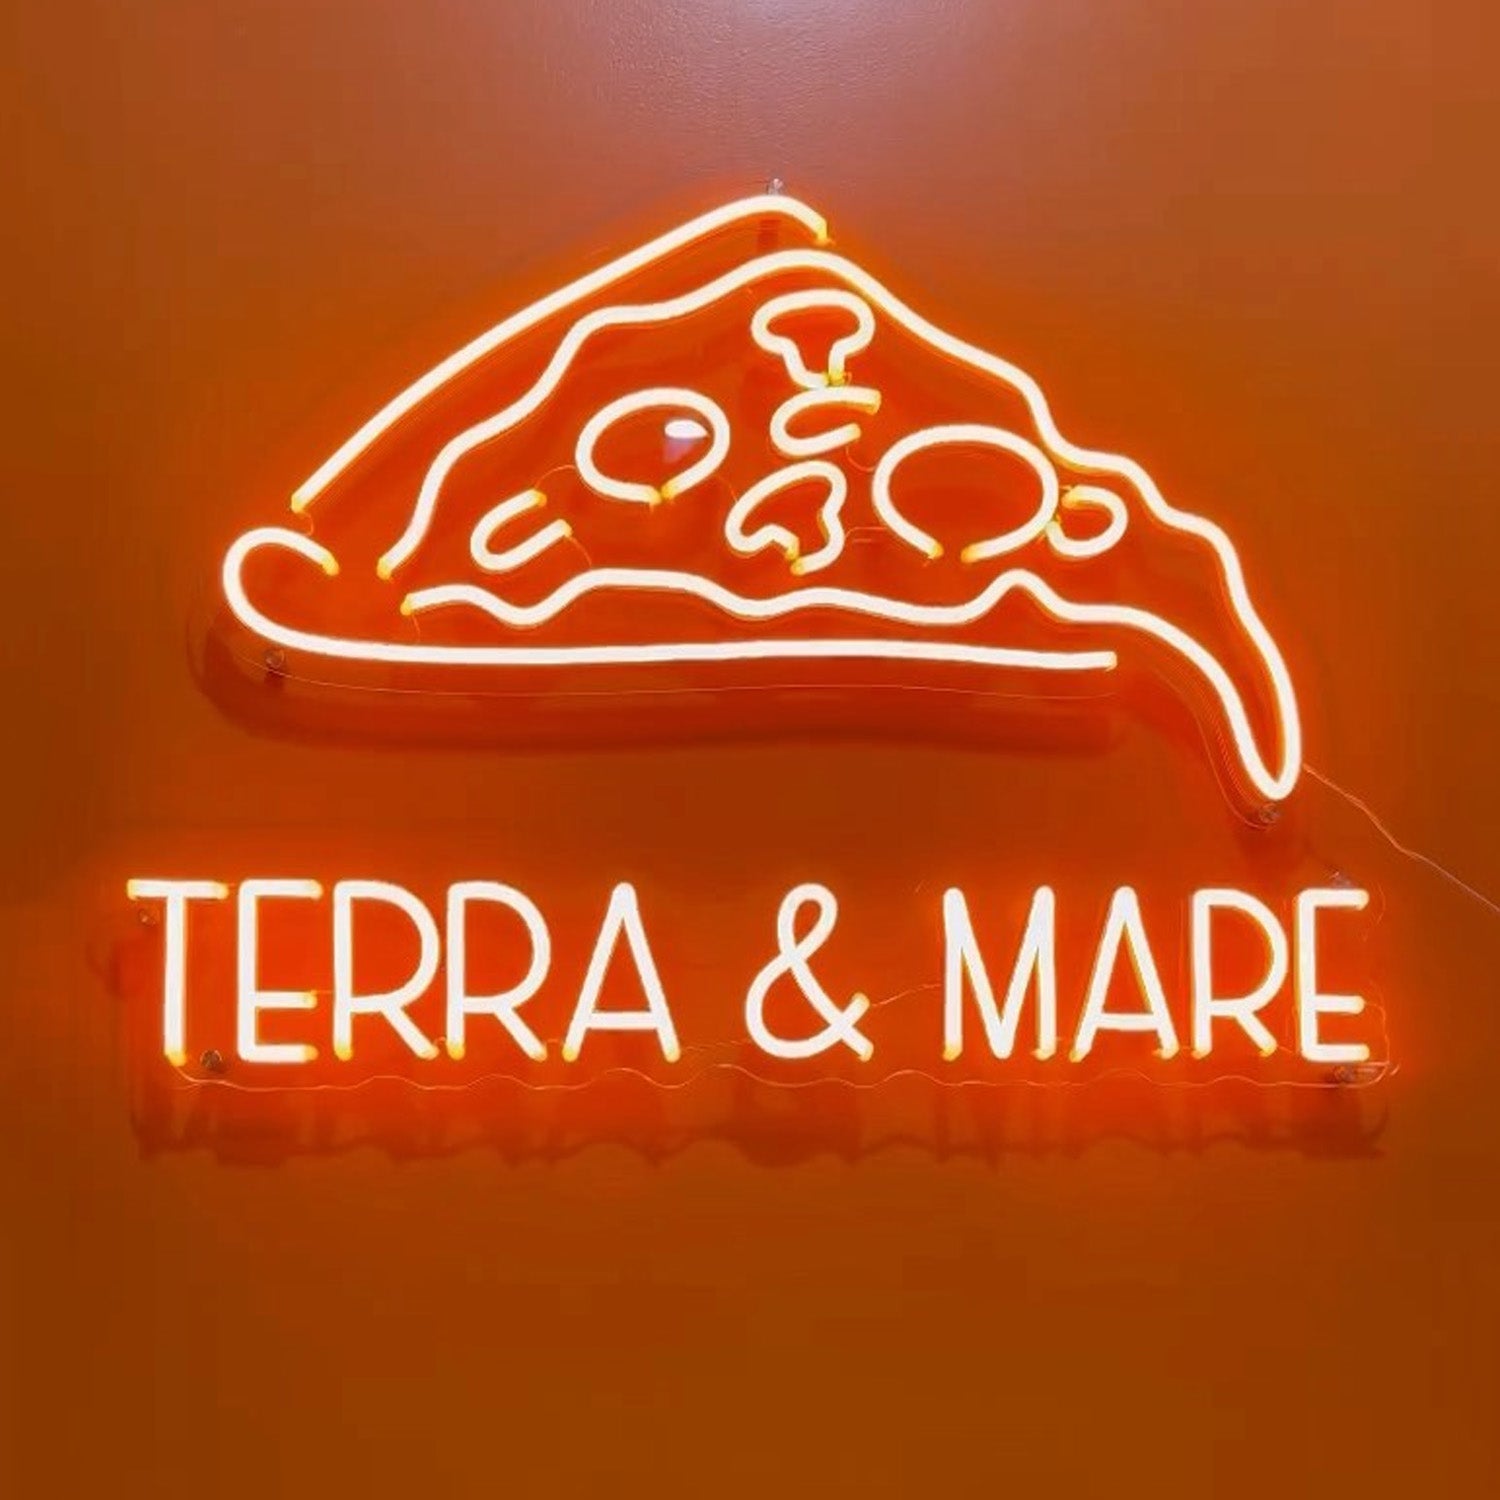 Custom Pizza Logo Neon Signs for Pizza Shop, Restaurant Sign, Food Bar, Business Brand